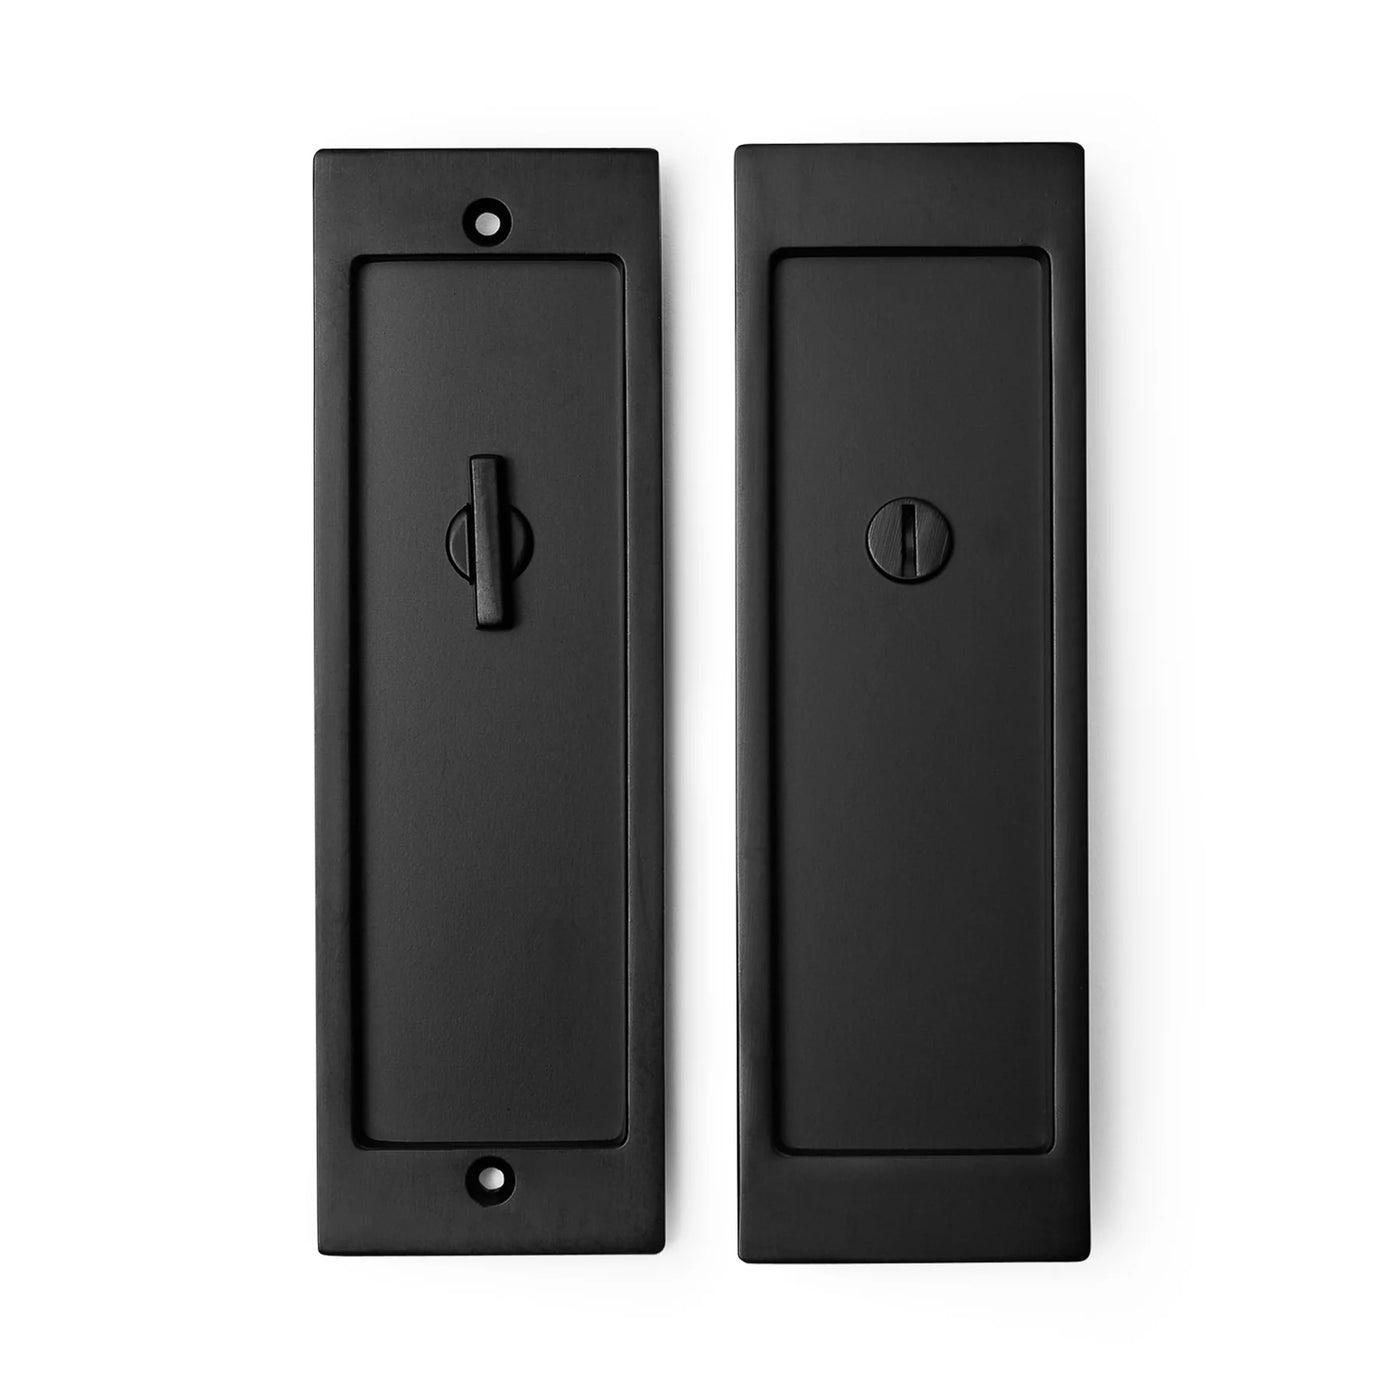 A pair of AHI Explore Pocket Door Set Privacy black handles on a white background.